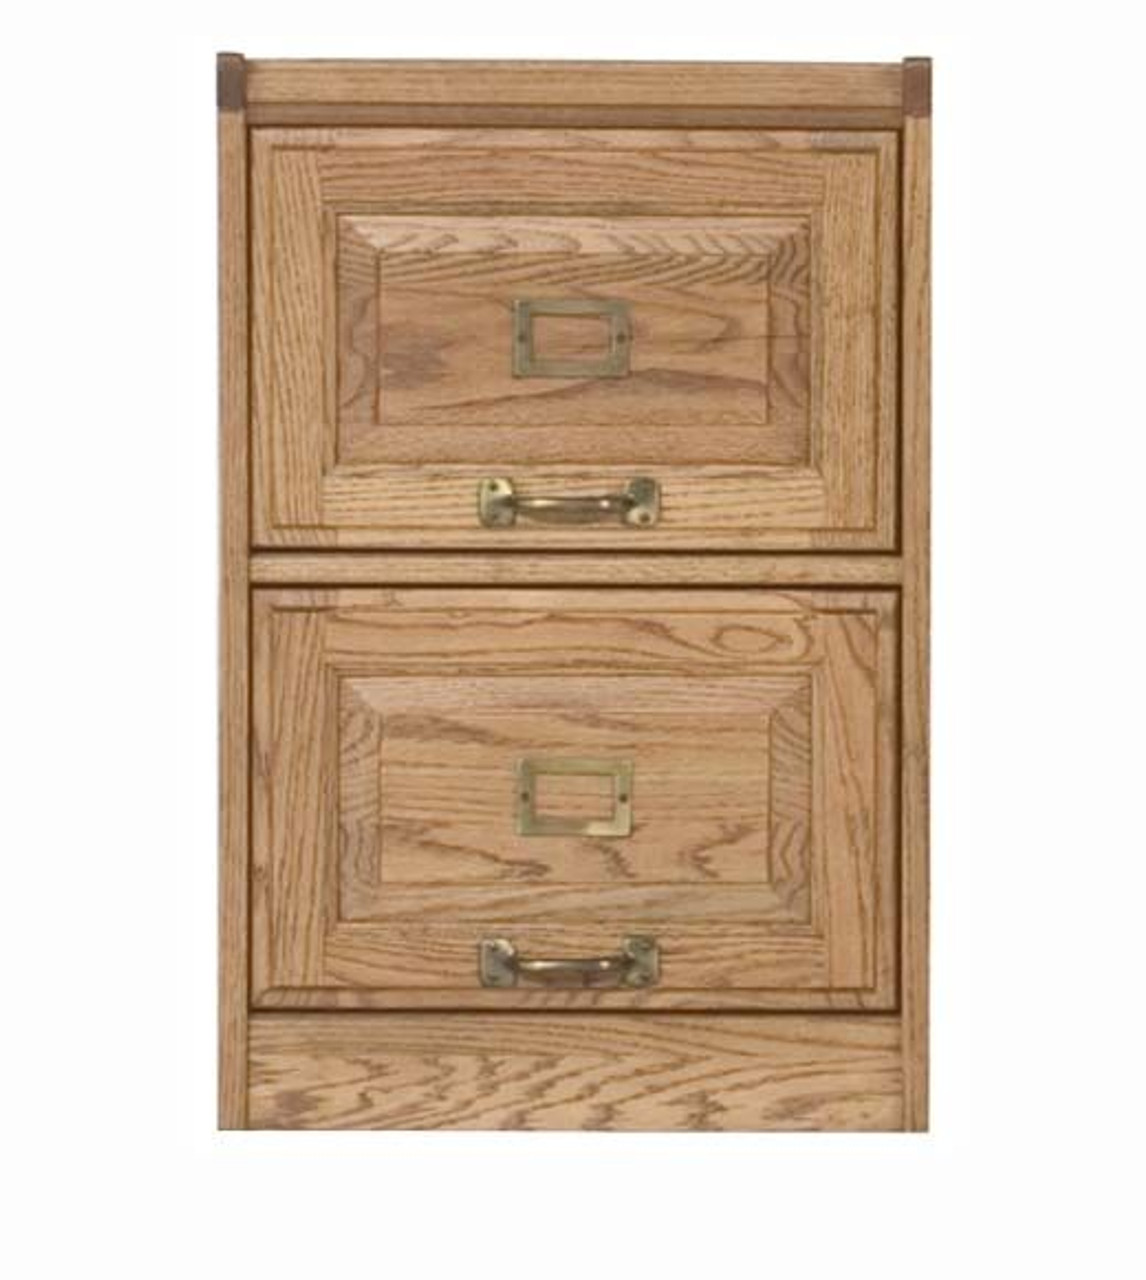 Eagle 18.5 x 28.5" Engineering Classic Oak American Traditional Home Office Solid Wood File Cabinet with 2 Easy Slide Drawers, Brass Hardware Trim, Available in All Stain Options, Part # E-16002